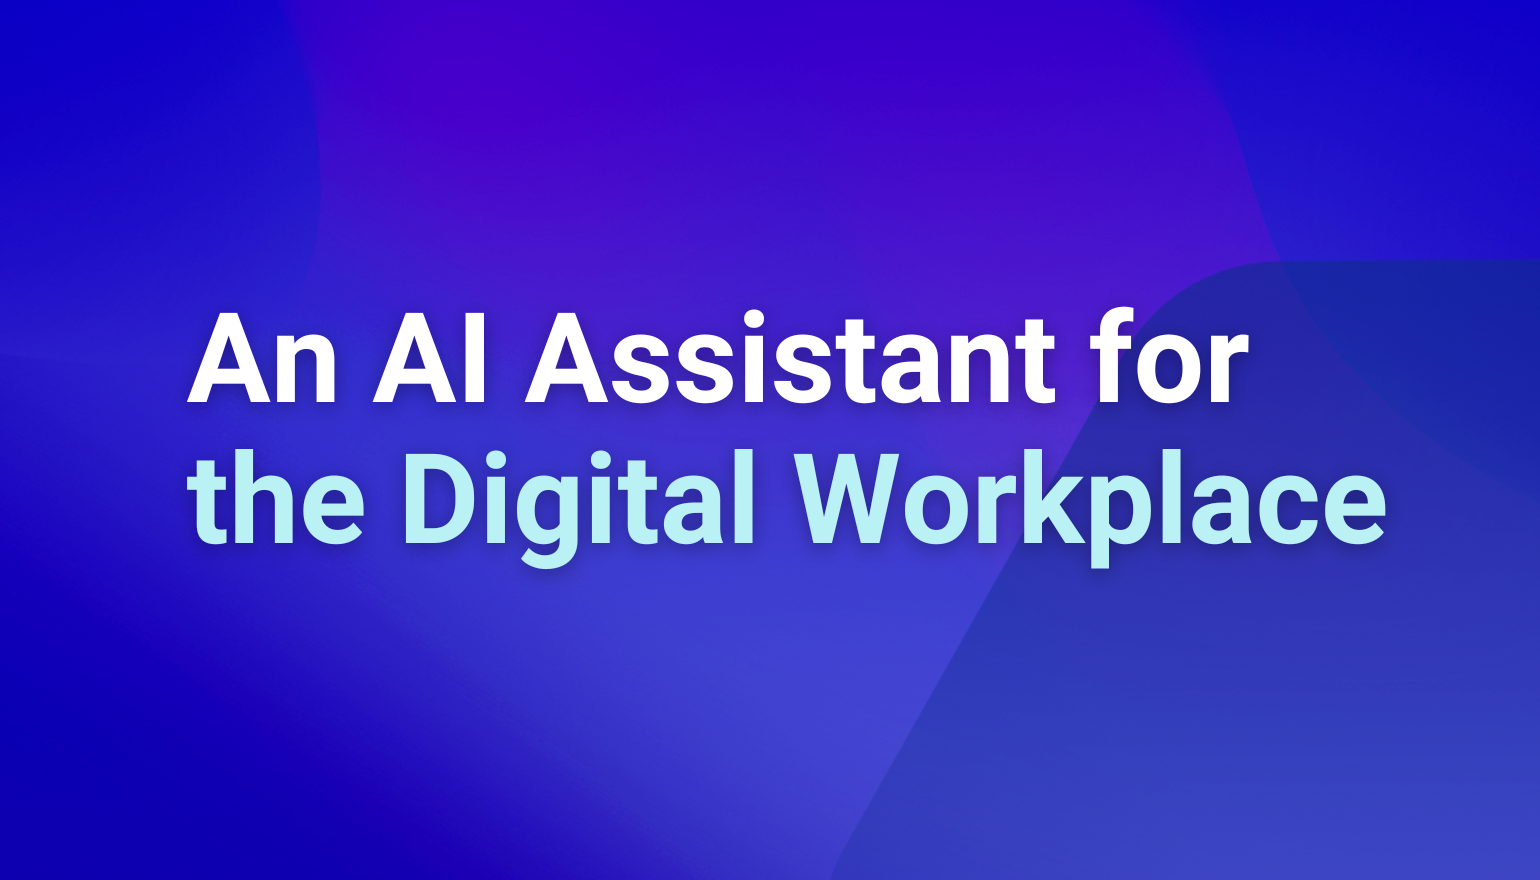 An AI Assistant for the Digital Workplace